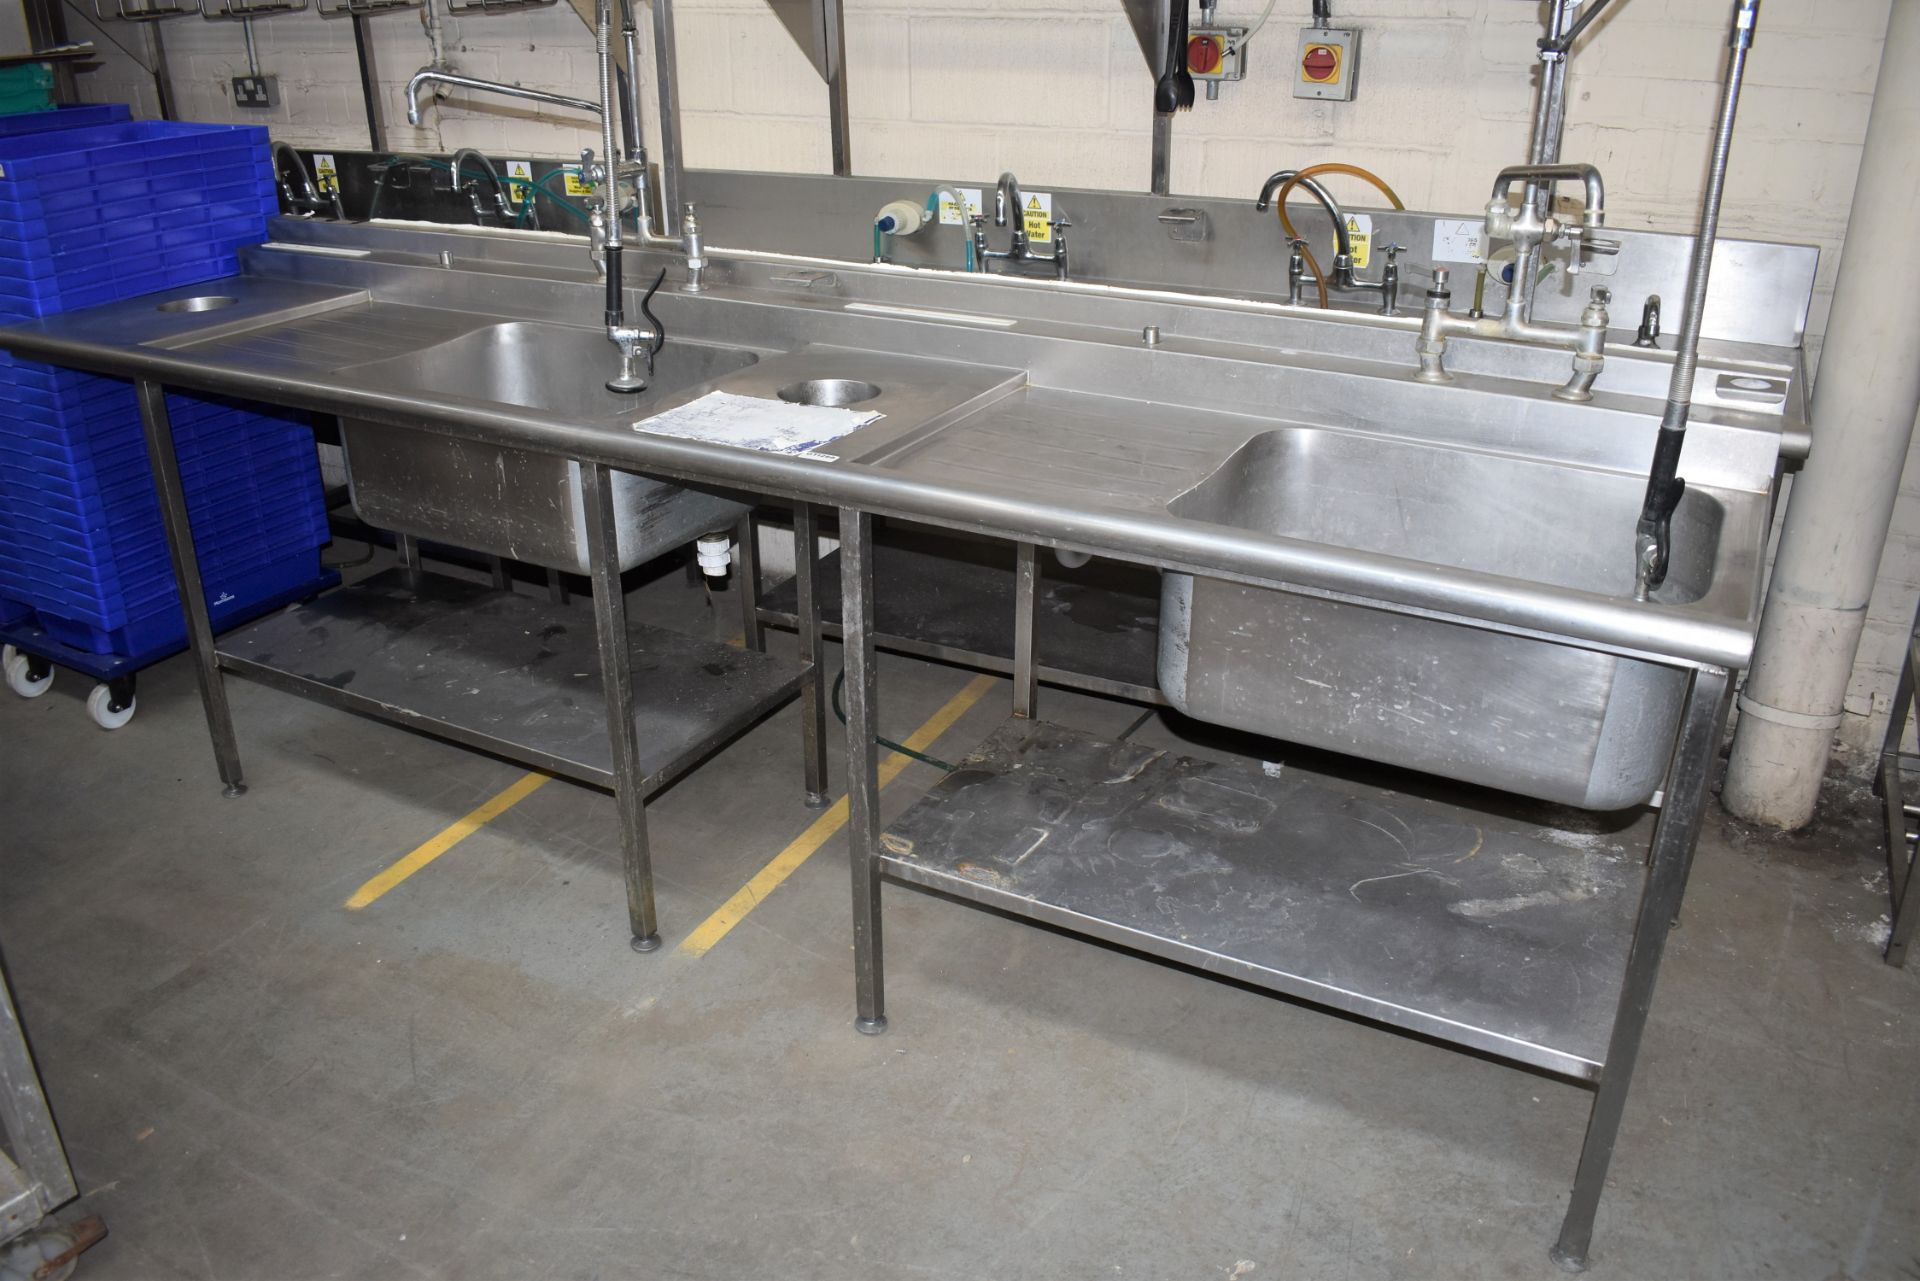 1 x Stainless Steel Commercial Wash Basin Unit With Twin Sink Bowl and Drainers, Mixer Taps, Spray